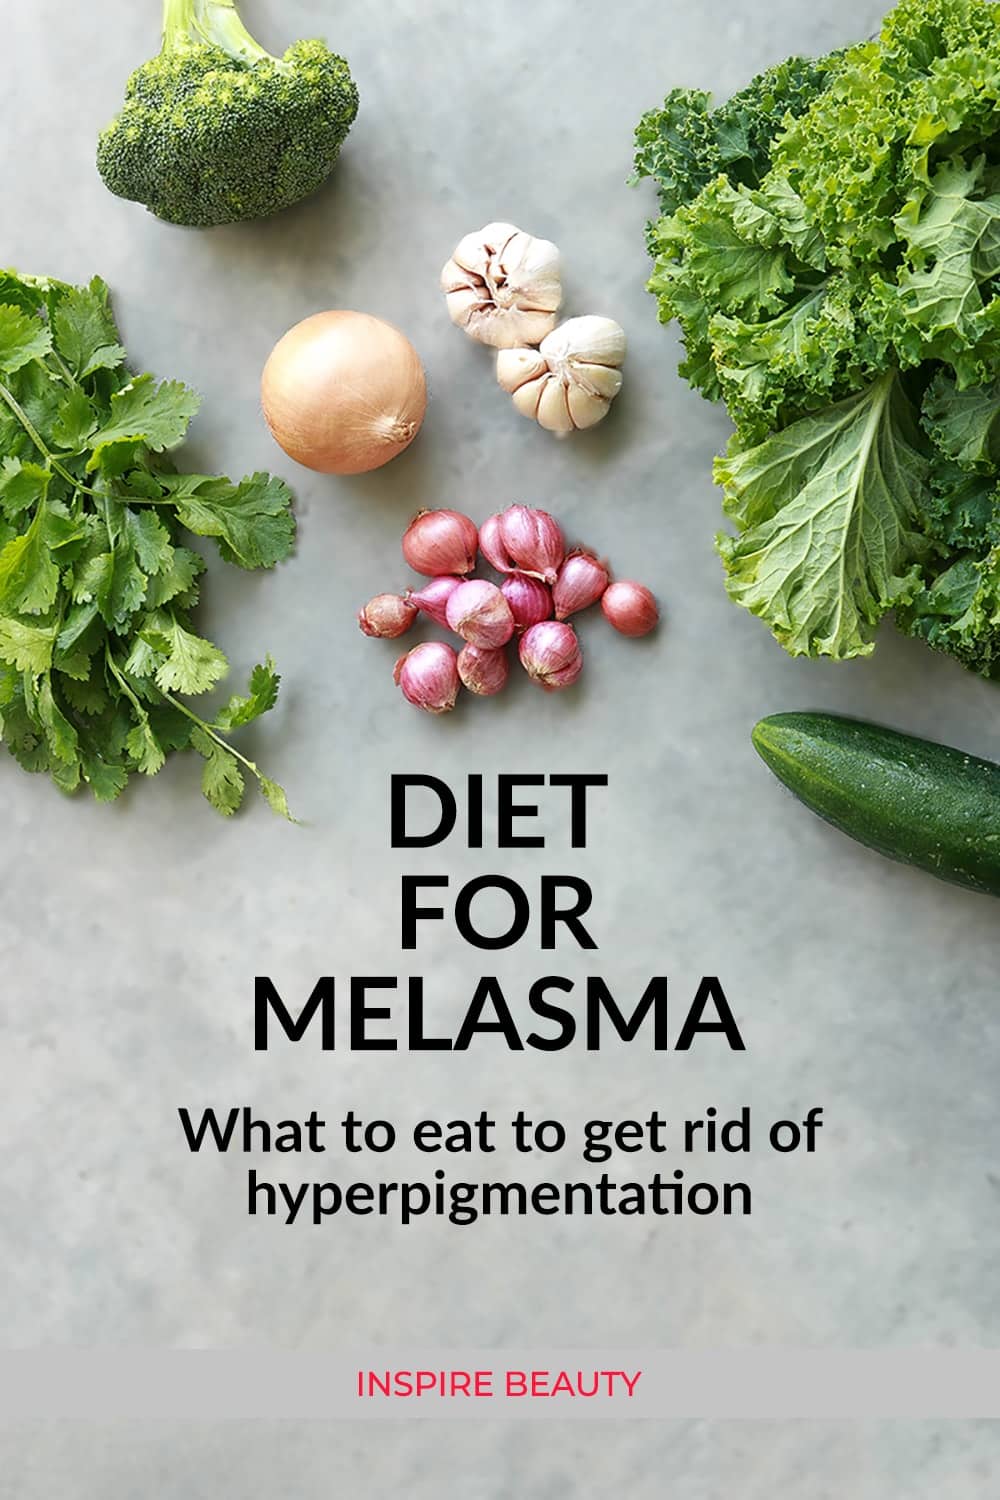 How to cure melasma from the inside by improving your diet